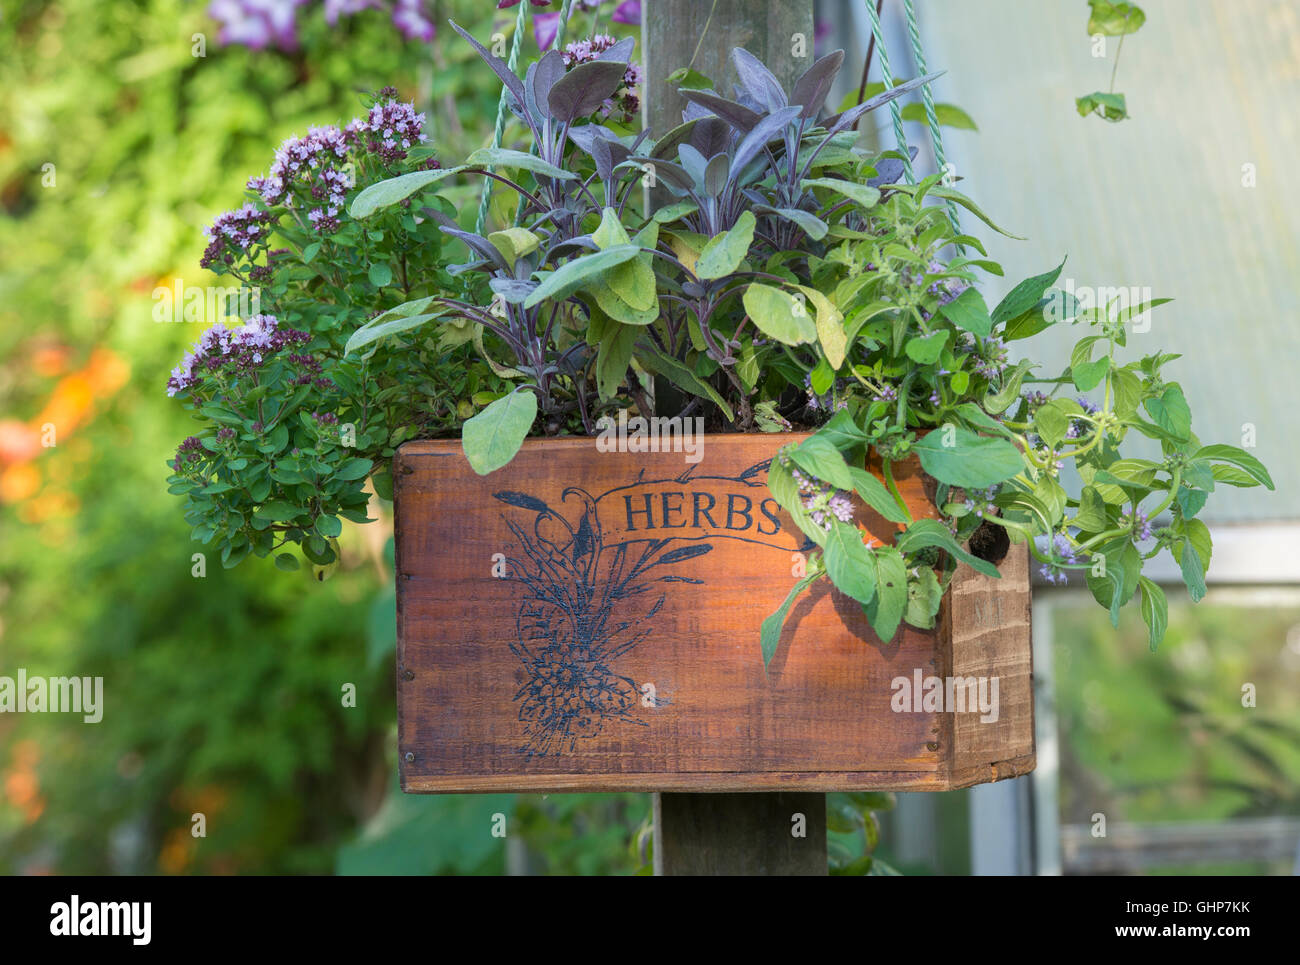 Hanging wooden herb planter containing banana mint, purple sage and compact marjoram in an english garden Stock Photo